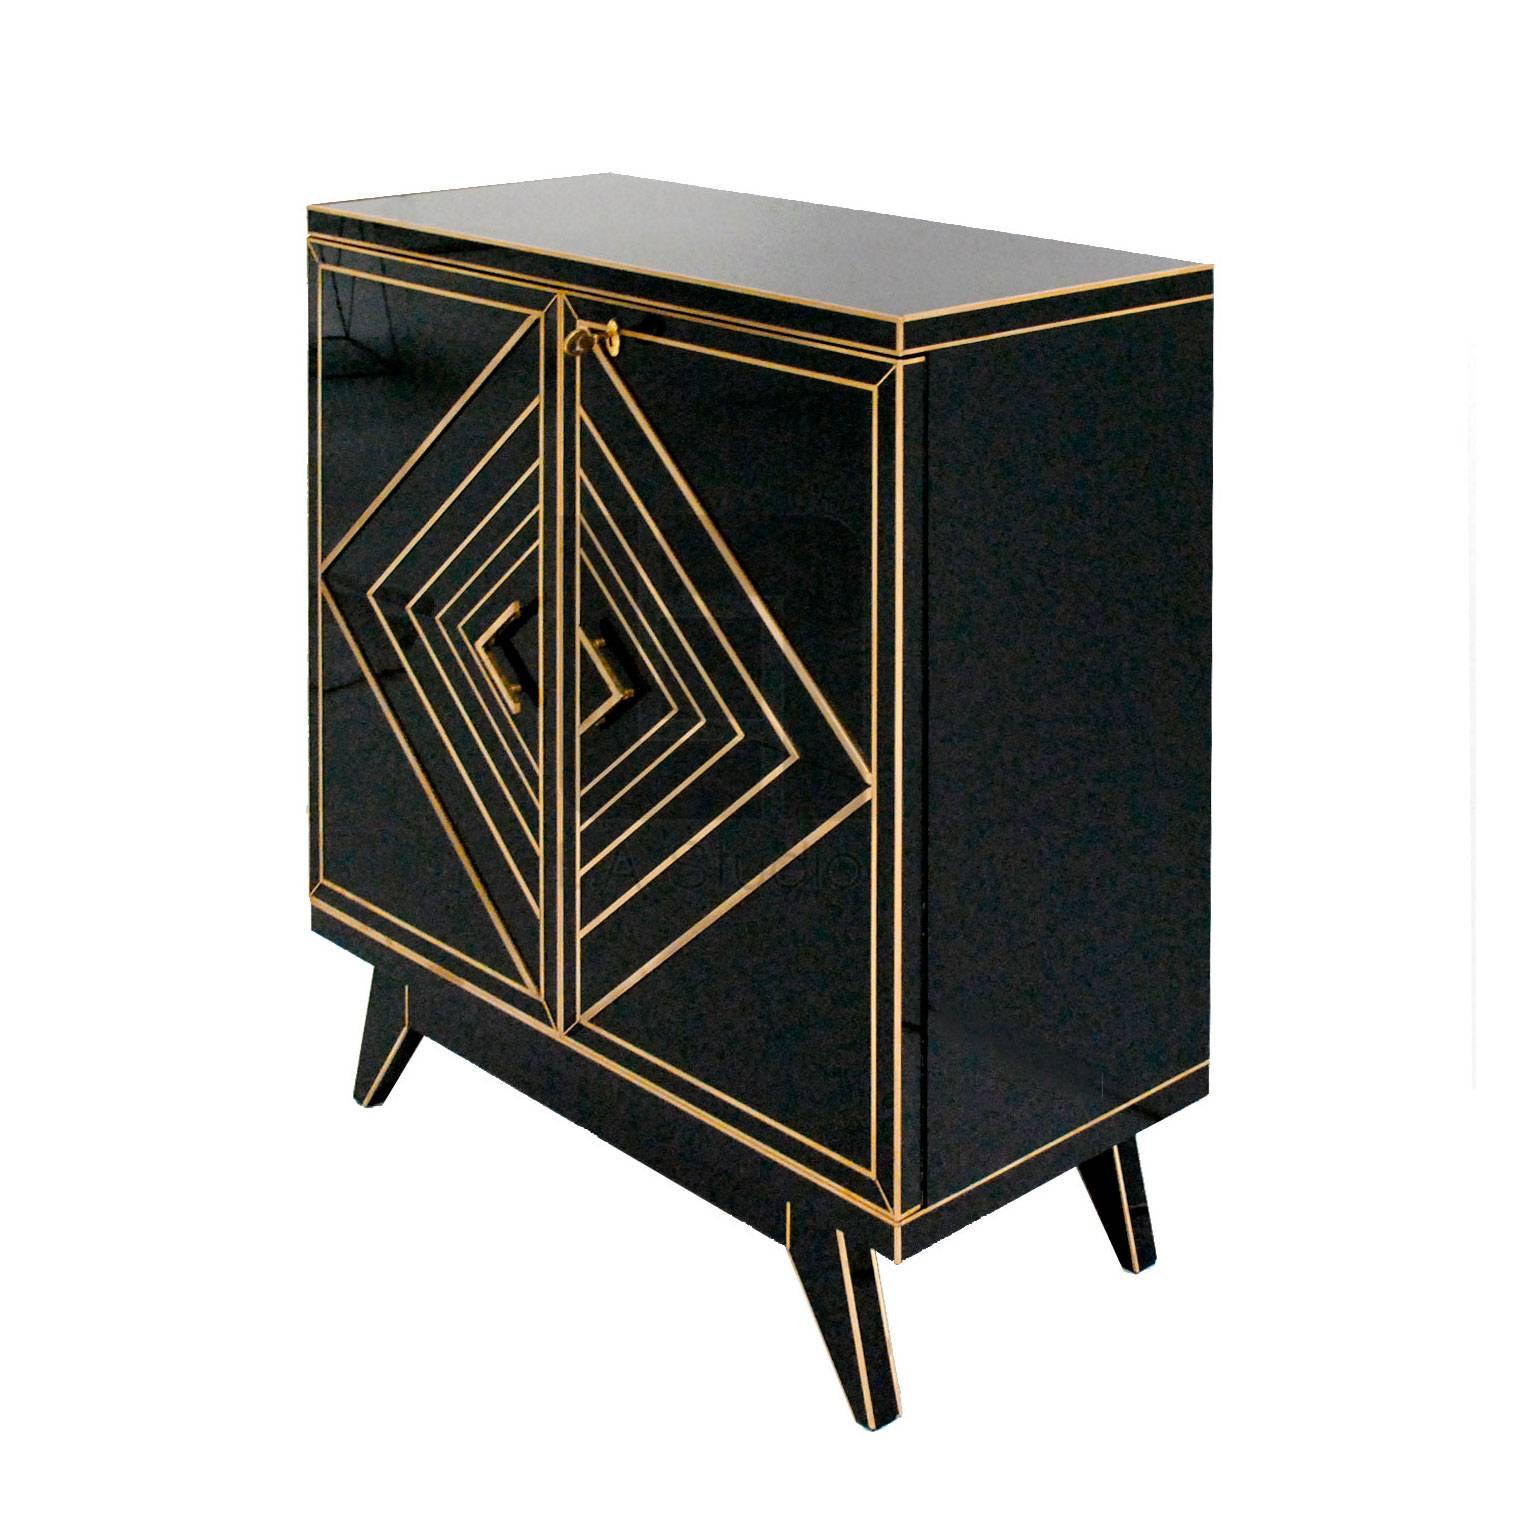 Italian sideboard composed of two folding doors. Structure made of solid wood covered with colored glass. Profiles and details are made of brass.
Italian manufacture.

Every item LA Studio offers is checked by our team of 10 craftsmen in our